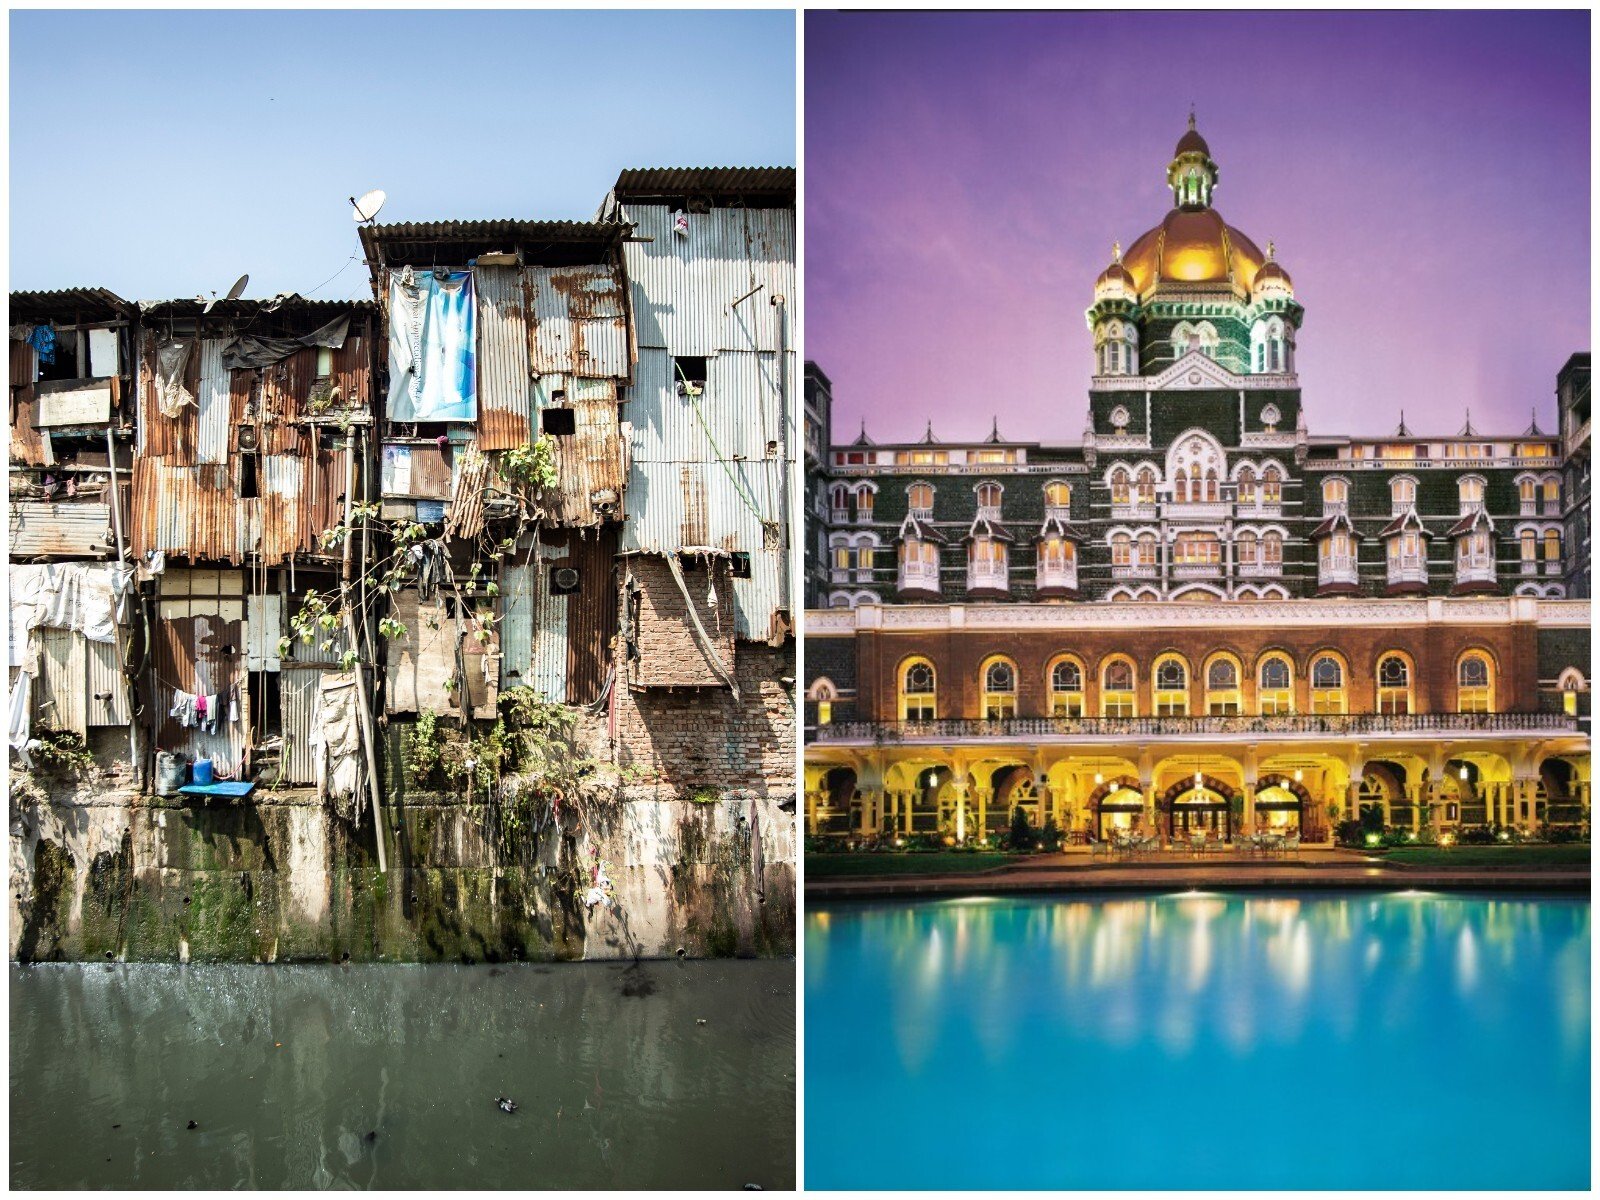 The two sides of Mumbai: the Dharavi shantytown and the glamorous Taj Mahal Palace. Photo: AFP